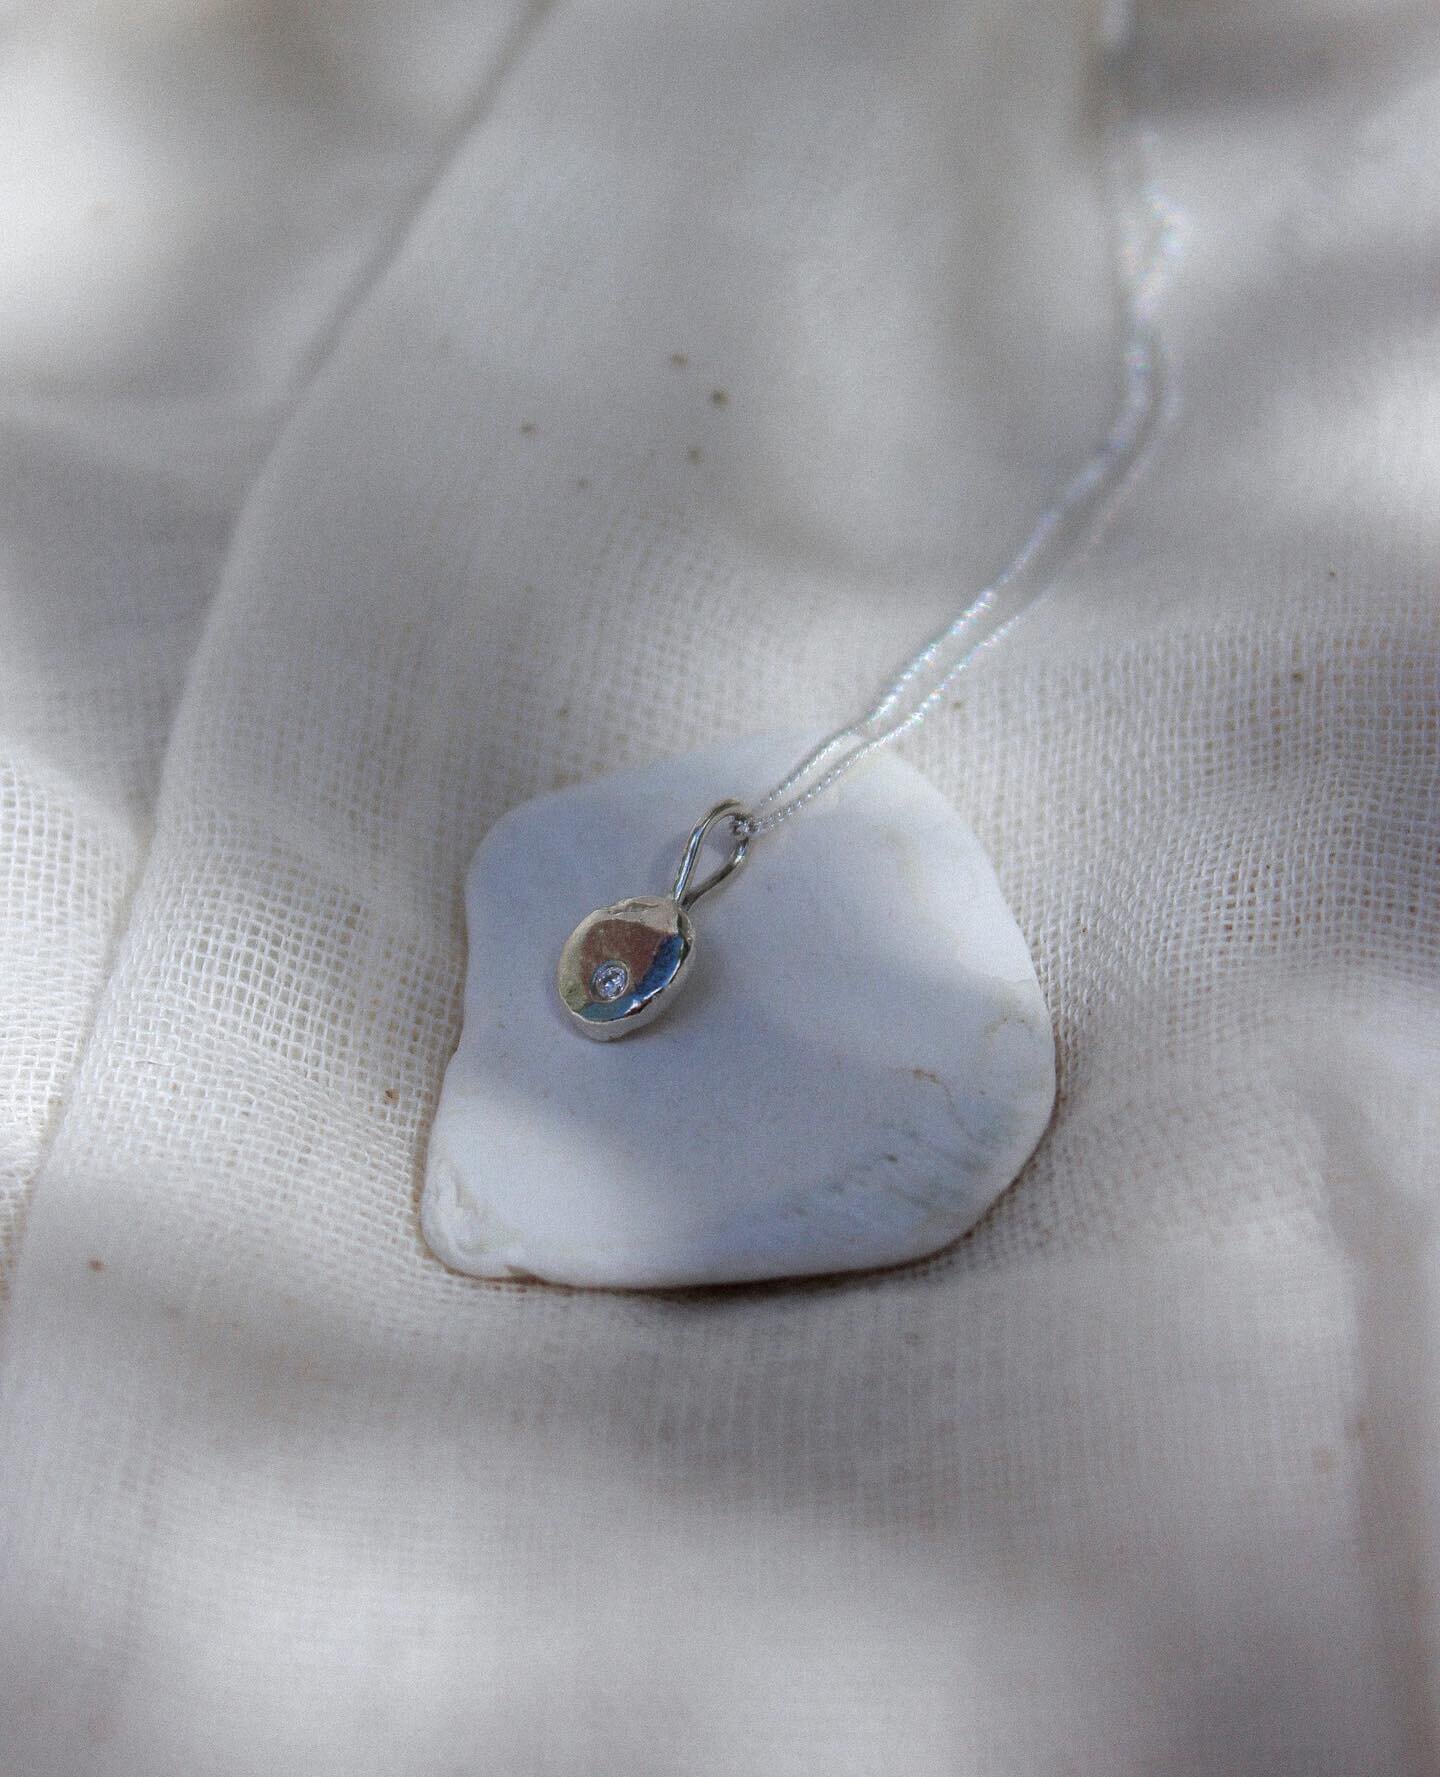 A little handmade sterling silver pebble, adorned with a tiny flush set cz to add a little sparkle.

Looks perfect on its own or layered with other necklaces.

How would you wear yours? 

#delicatenecklace
#layeringnecklace
#cznecklace